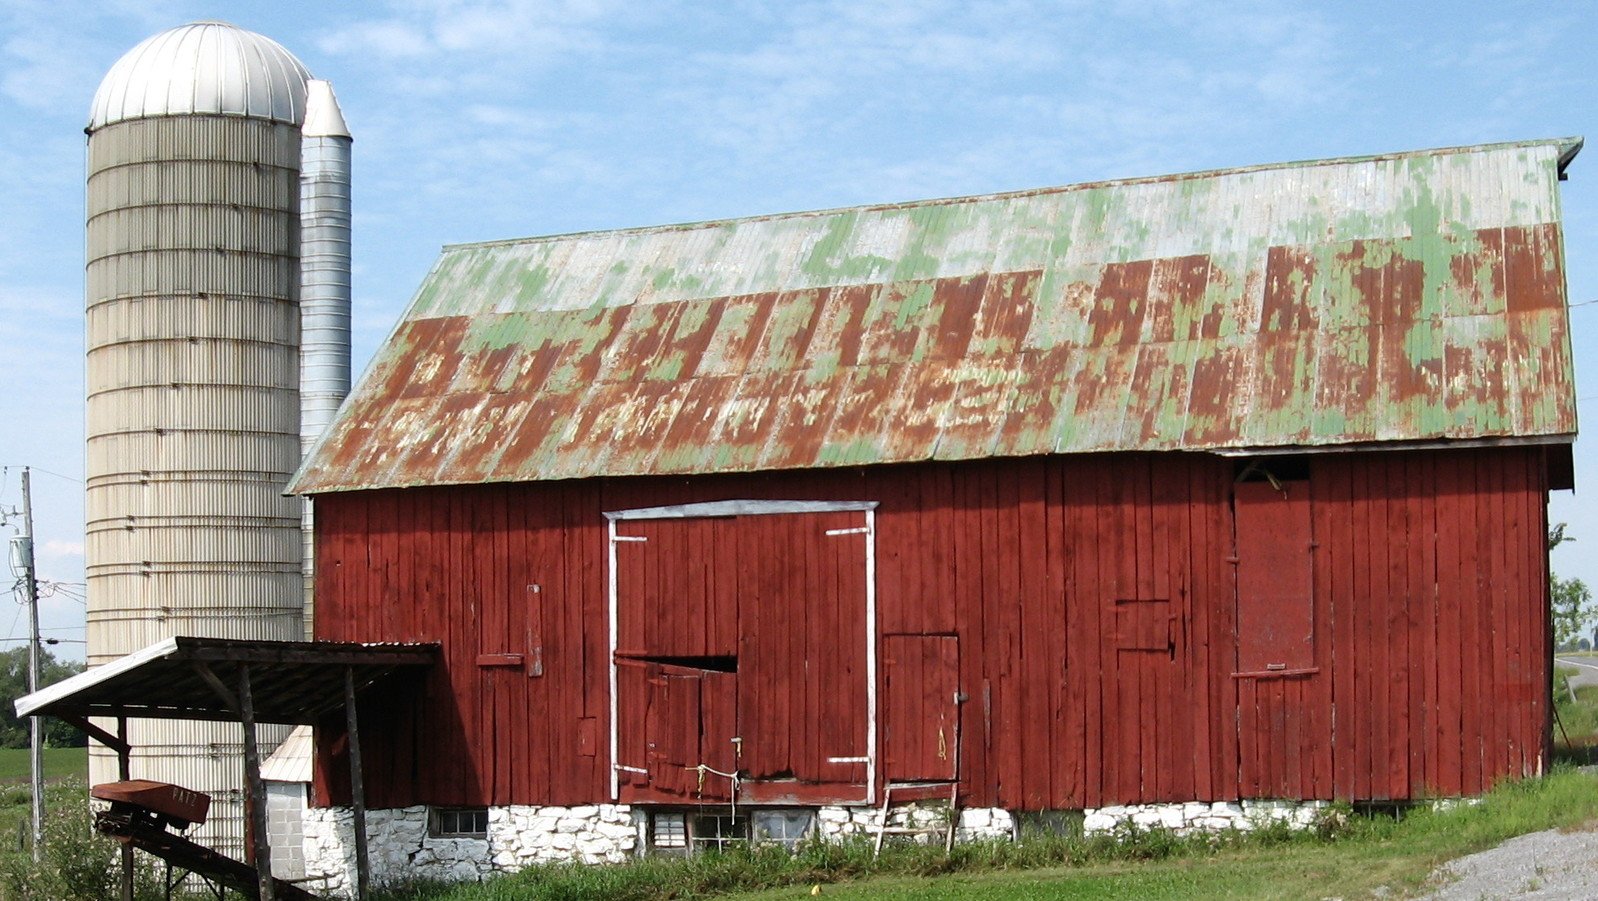 the red barn has an old paint peeling off